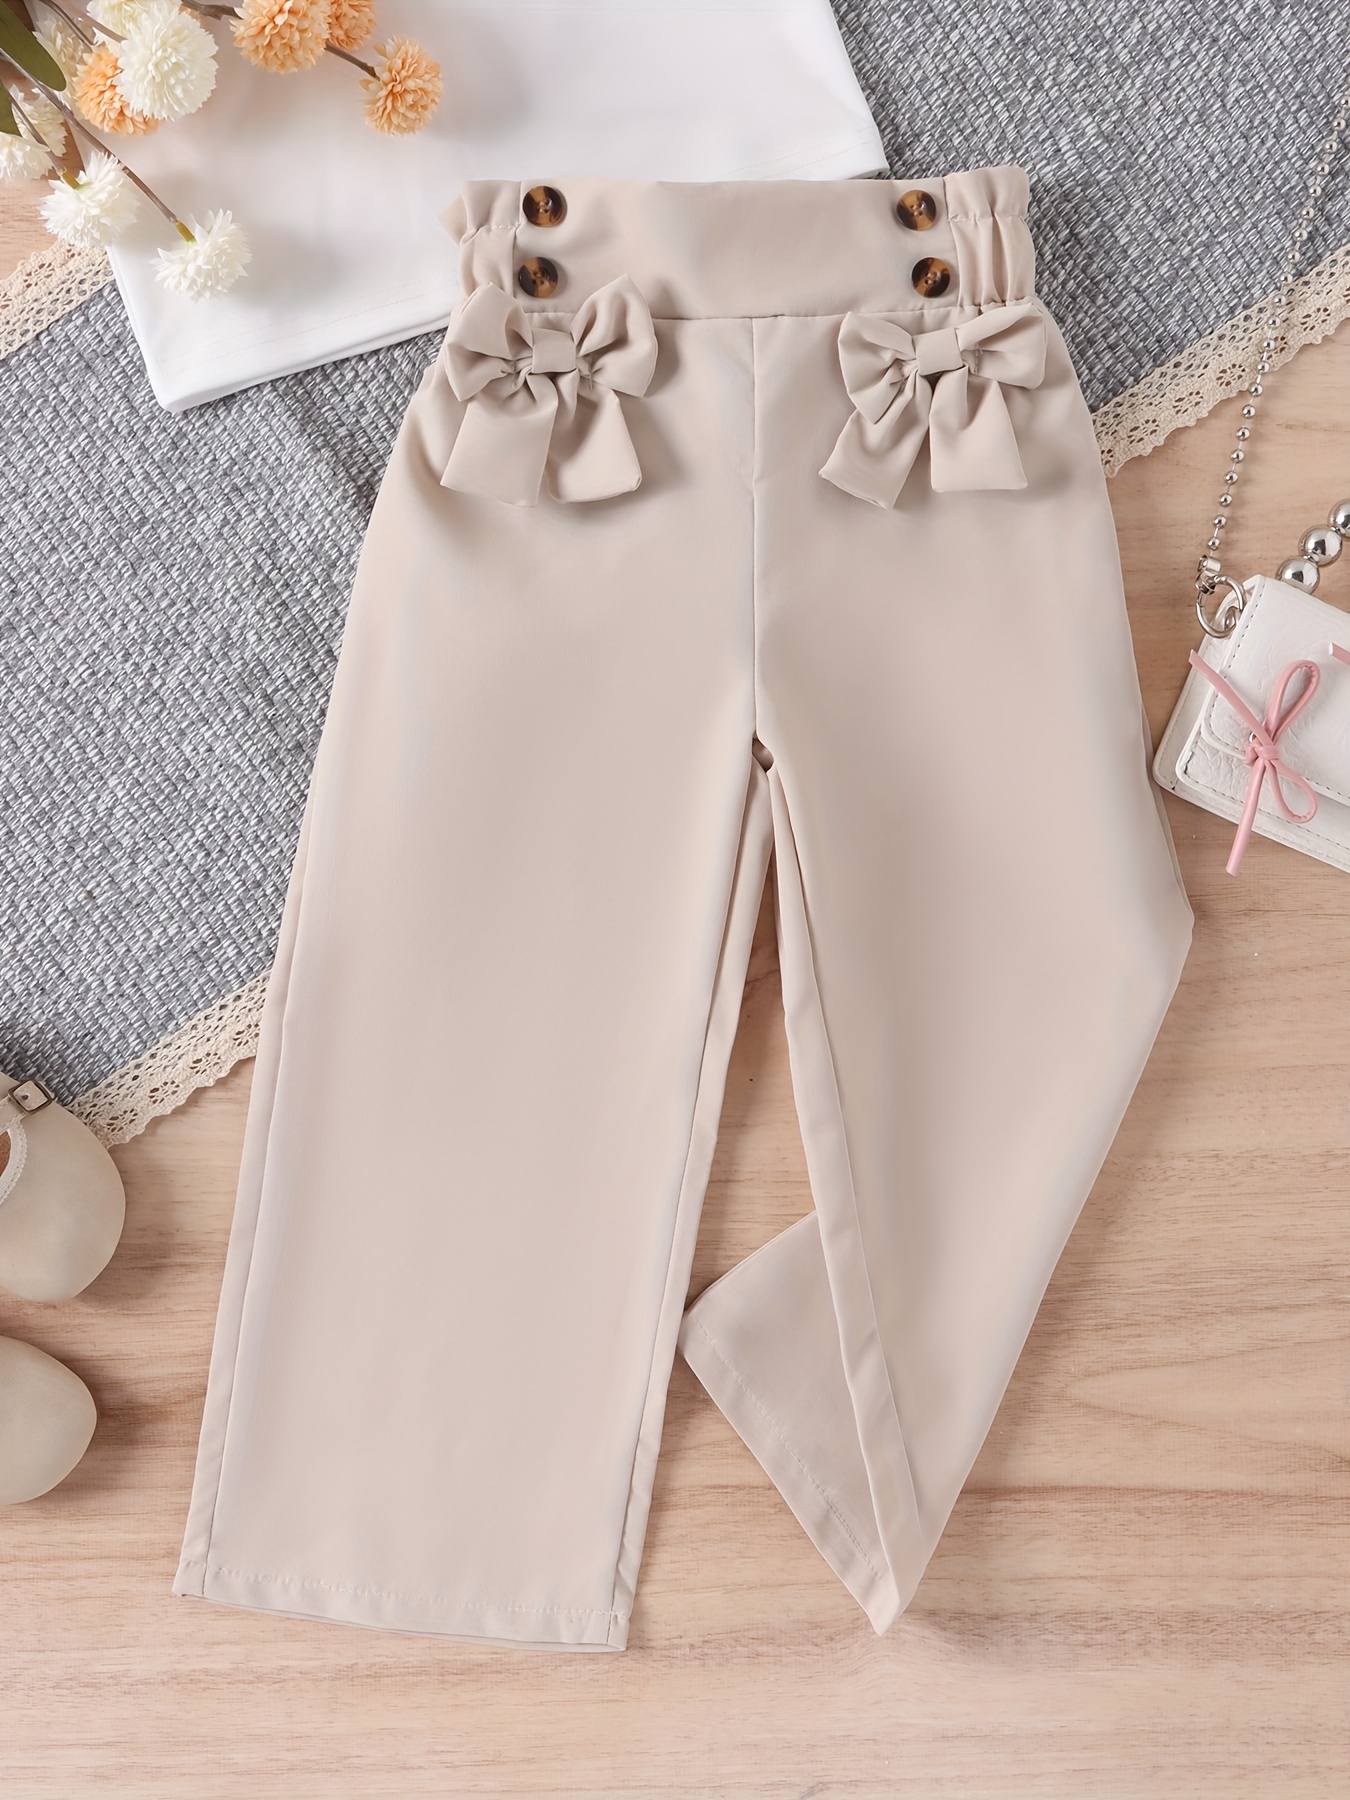 Summer Pants for Women Women's Linen Pants High Waist Solid Pocket Ankle Trousers  Women Bow Tie High Waist Pencil, Beige, Small : : Clothing, Shoes  & Accessories